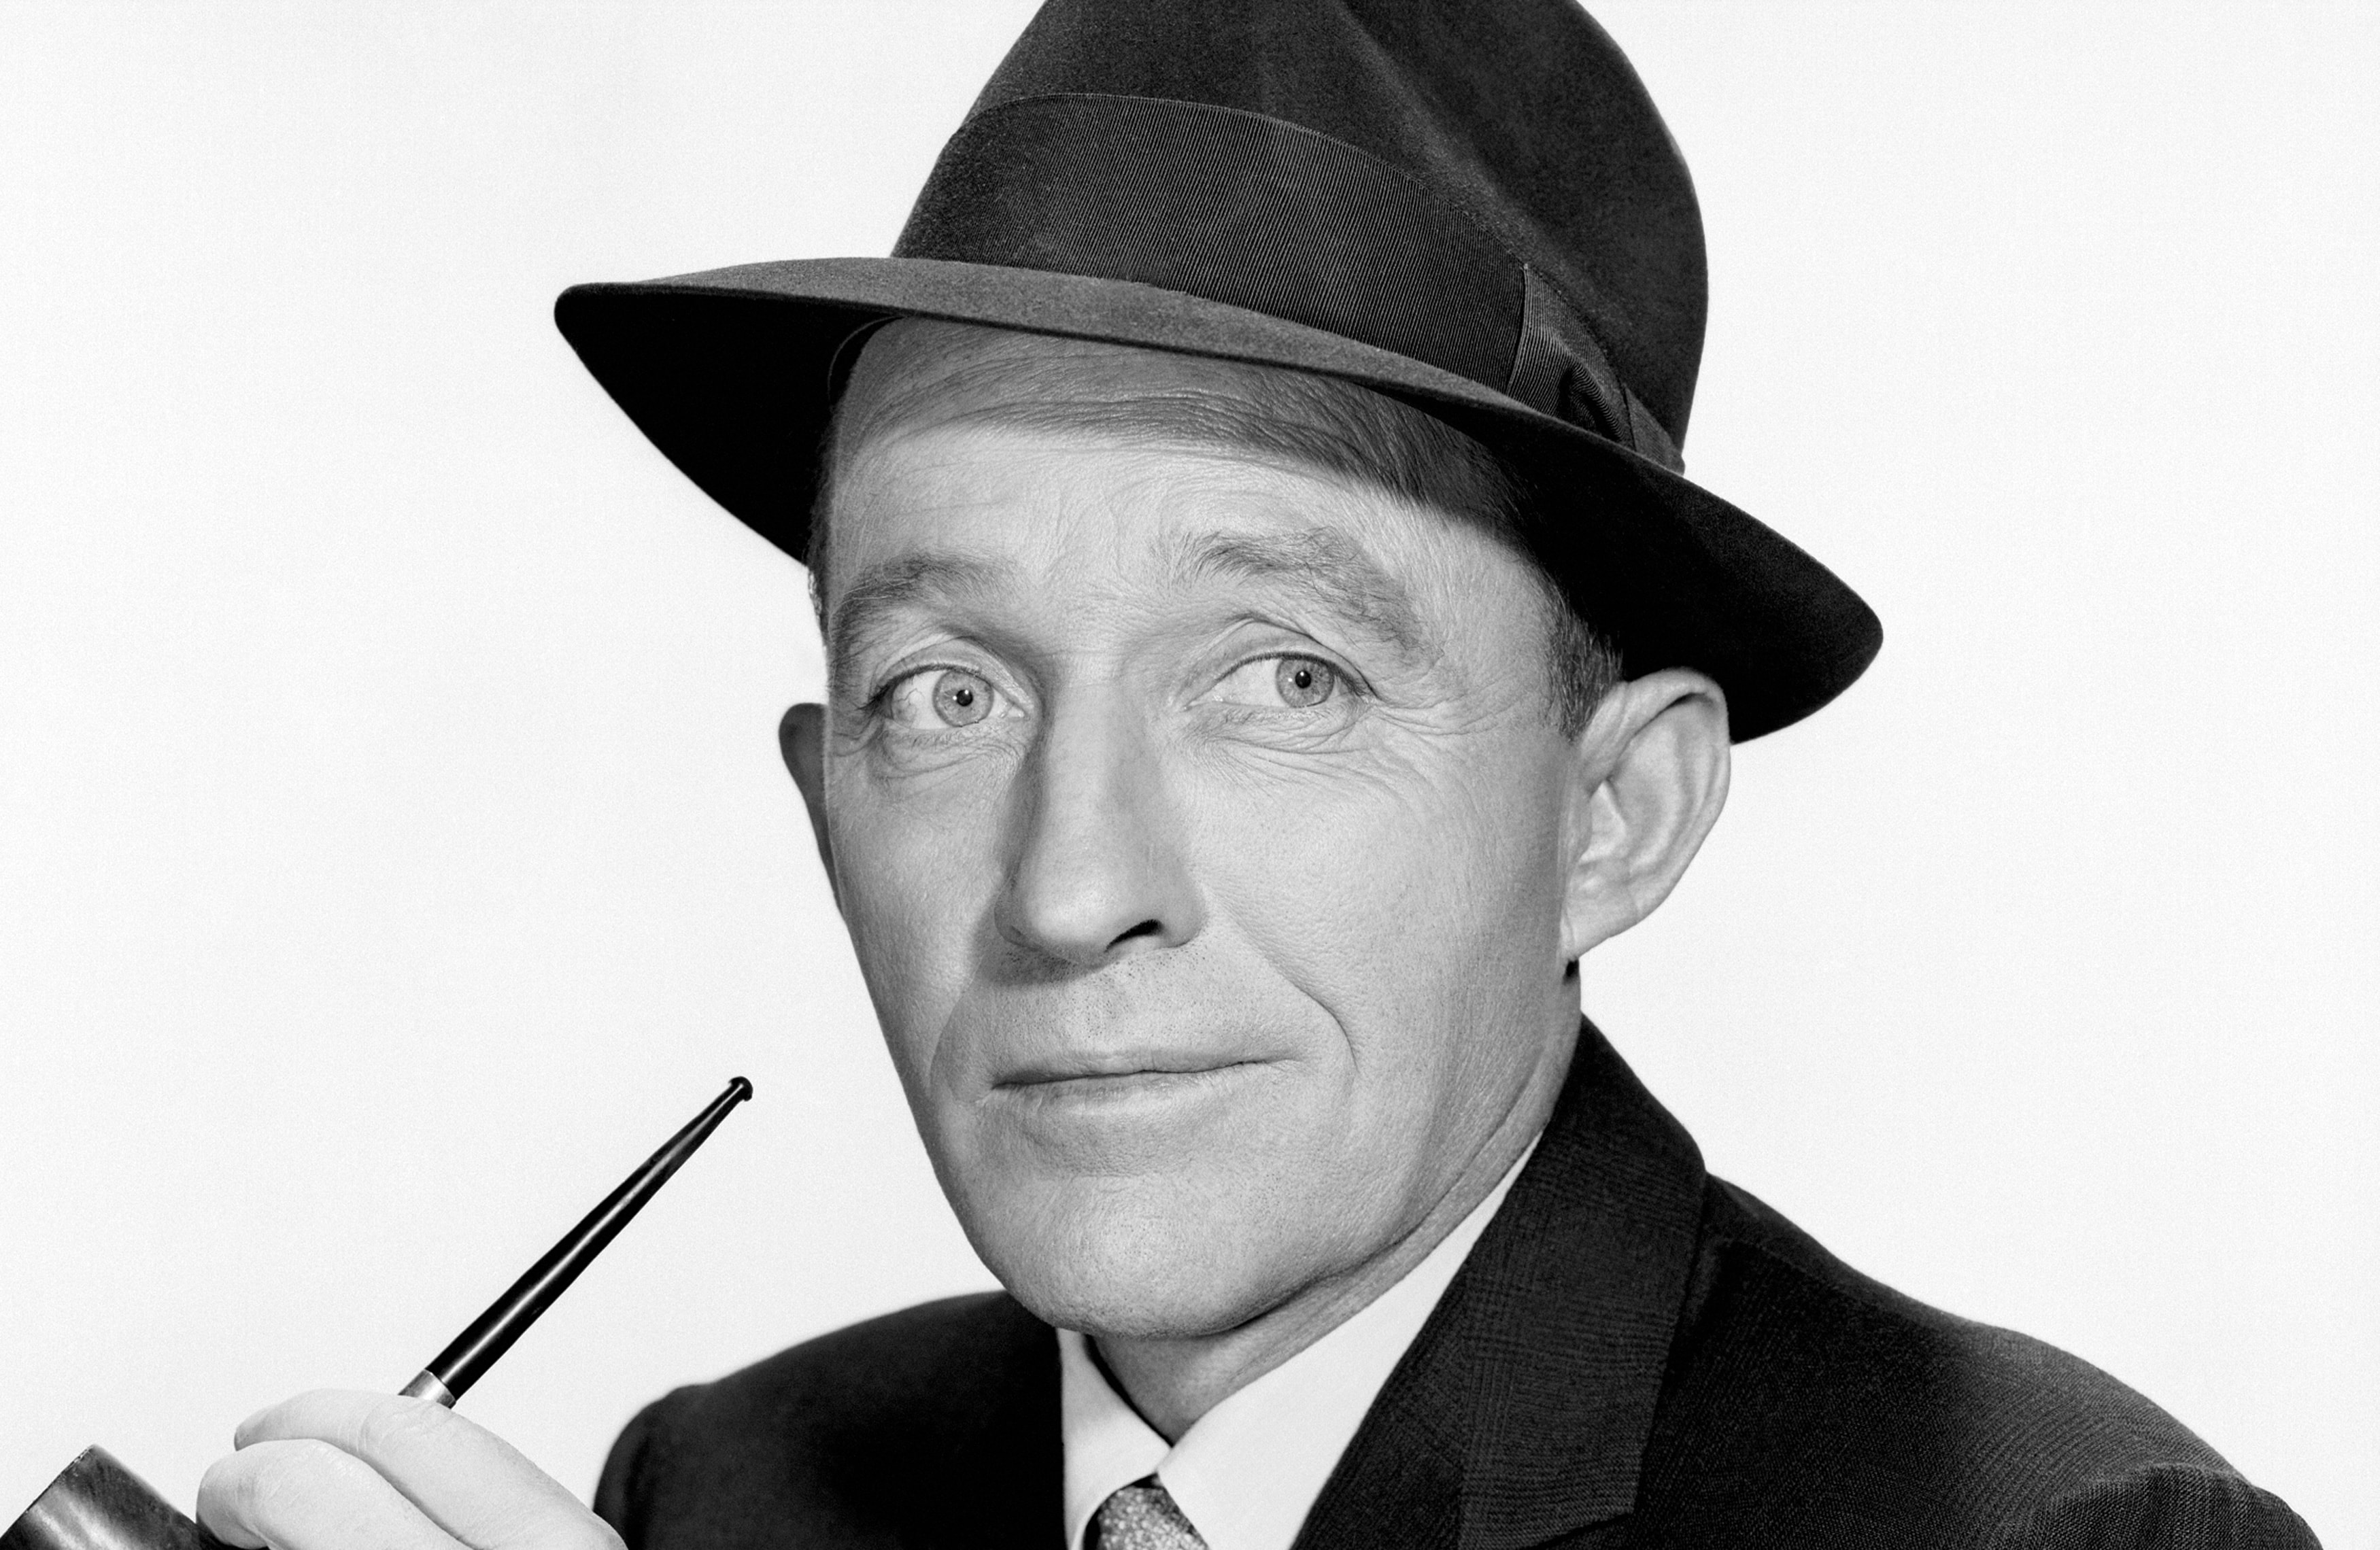 what bing crosby recording has estimated sales in excess of 100 million copies worldwide